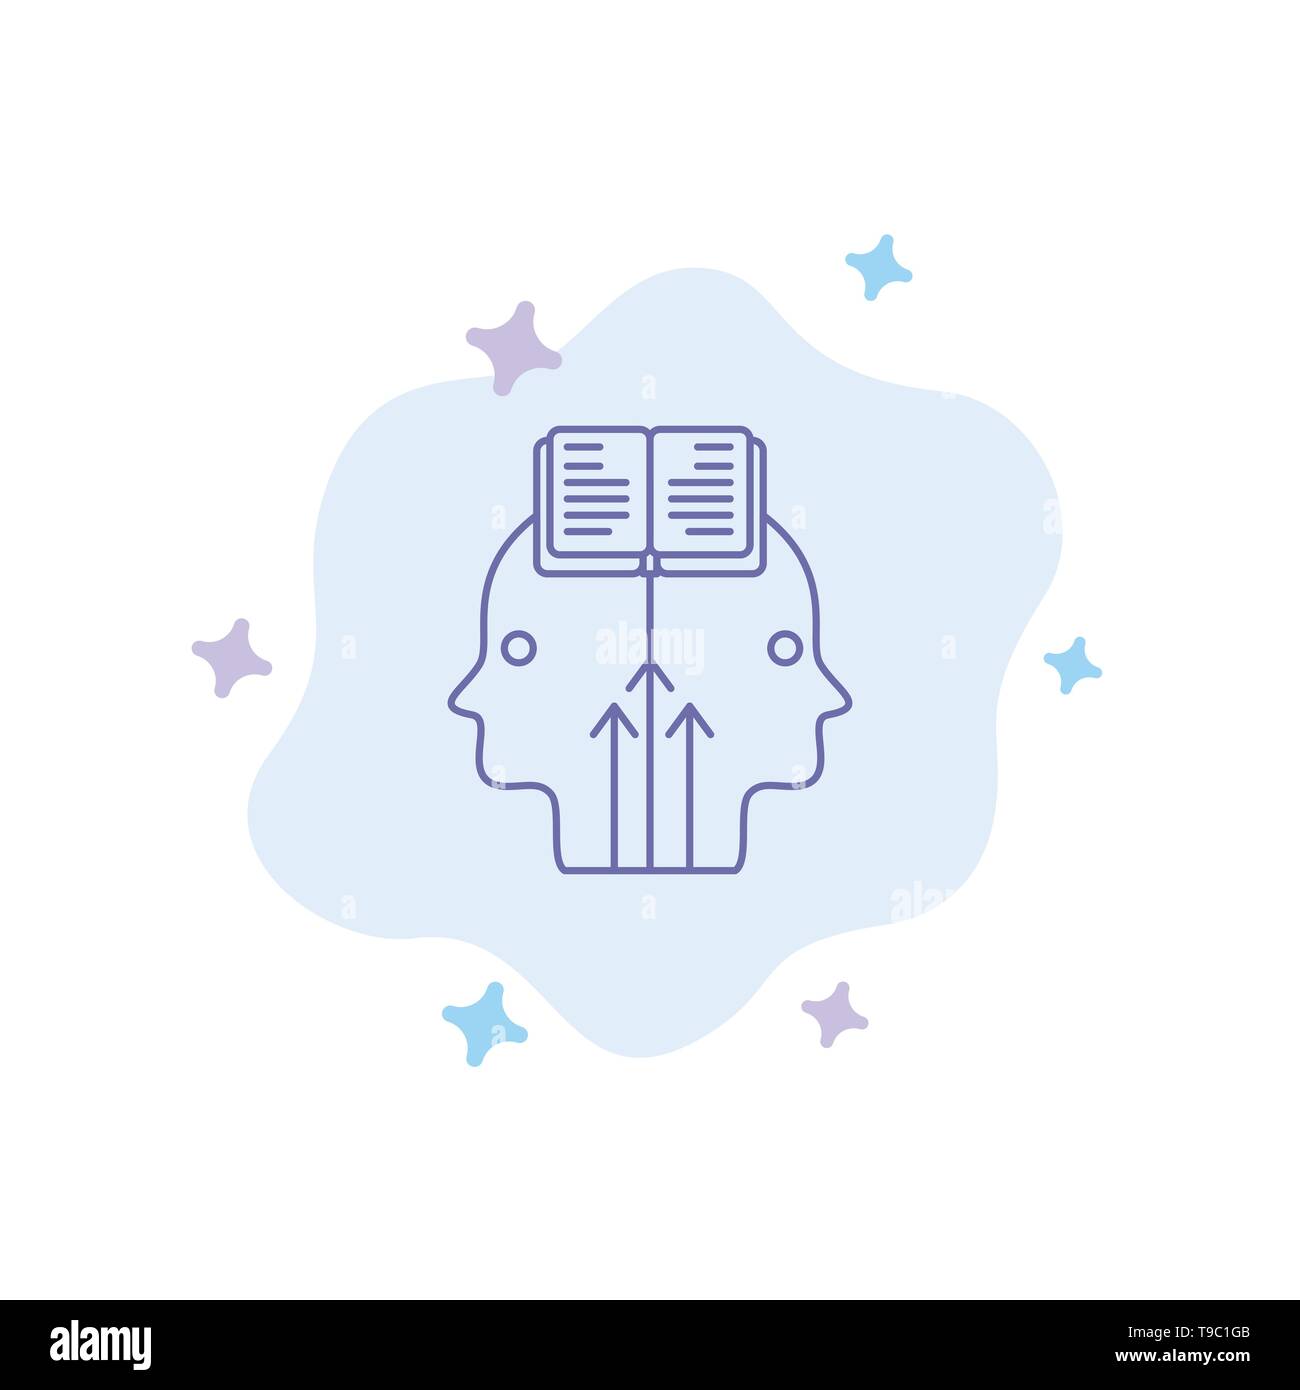 Mind, Reading, Programming, Man Blue Icon on Abstract Cloud Background Stock Vector